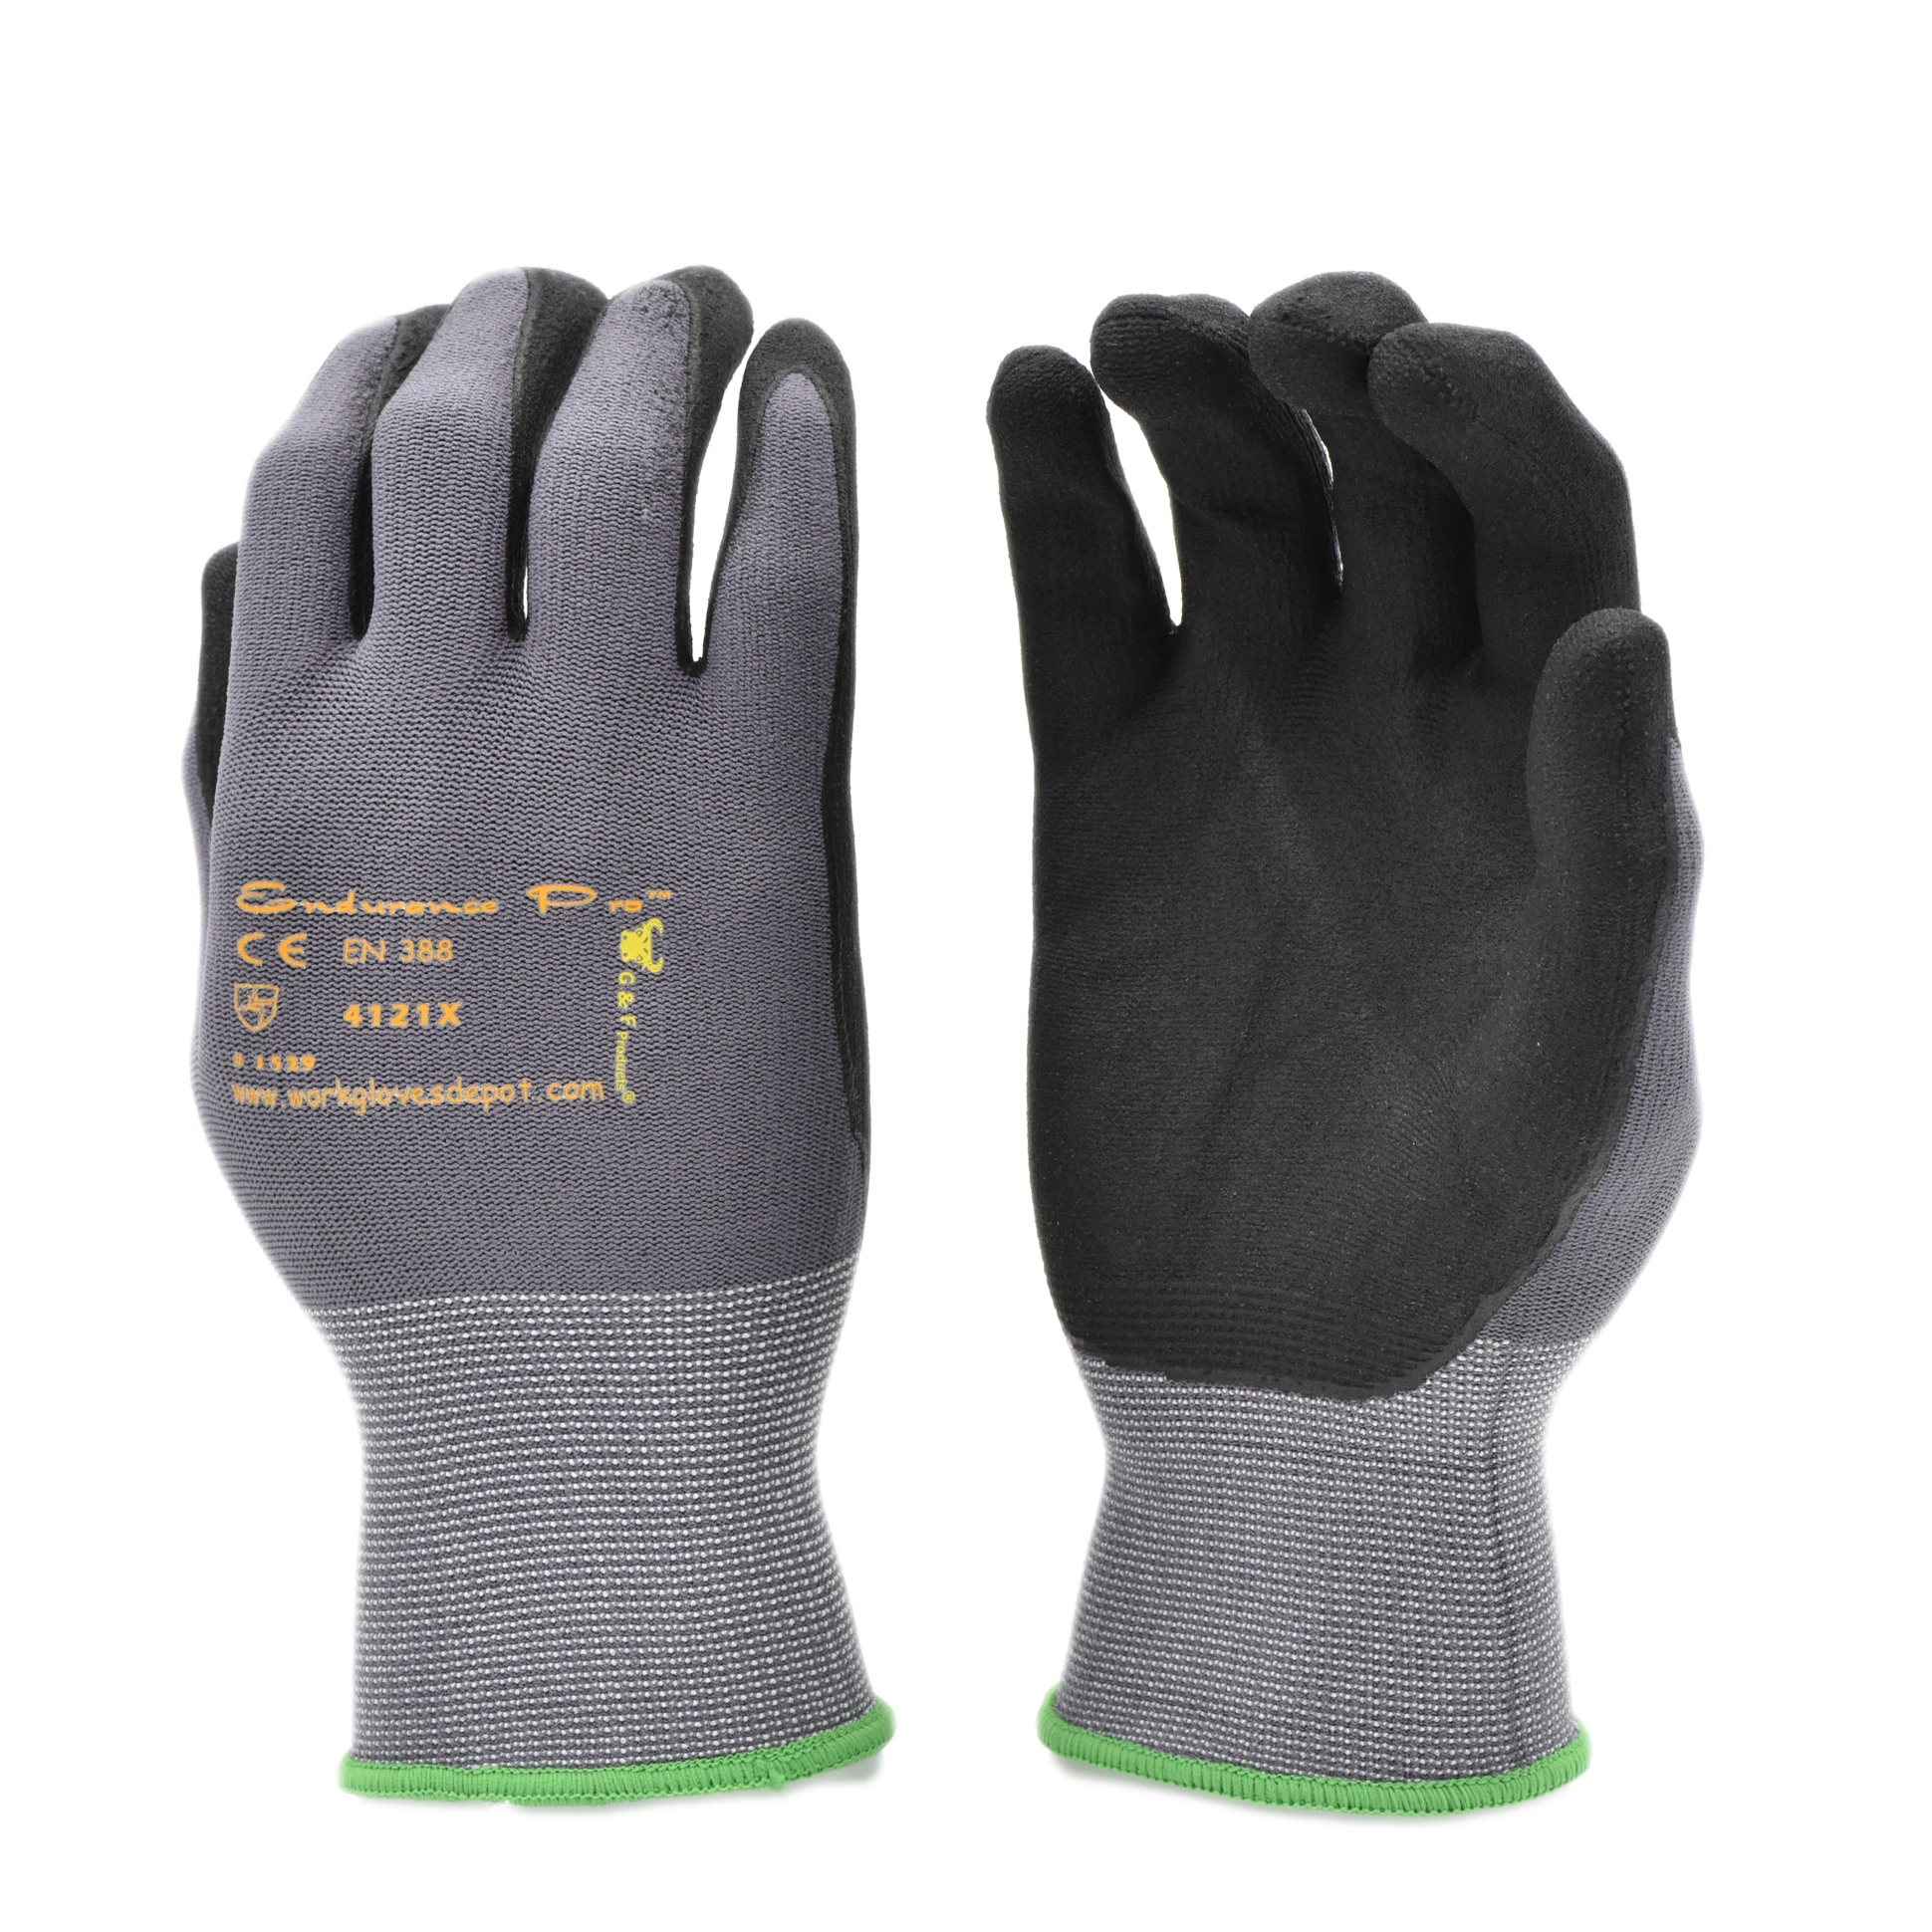 G & F Products Knit Nylon Gloves 1529L-12, Micro Form Nitrile Grip, 12 Pack, Large - image 1 of 7